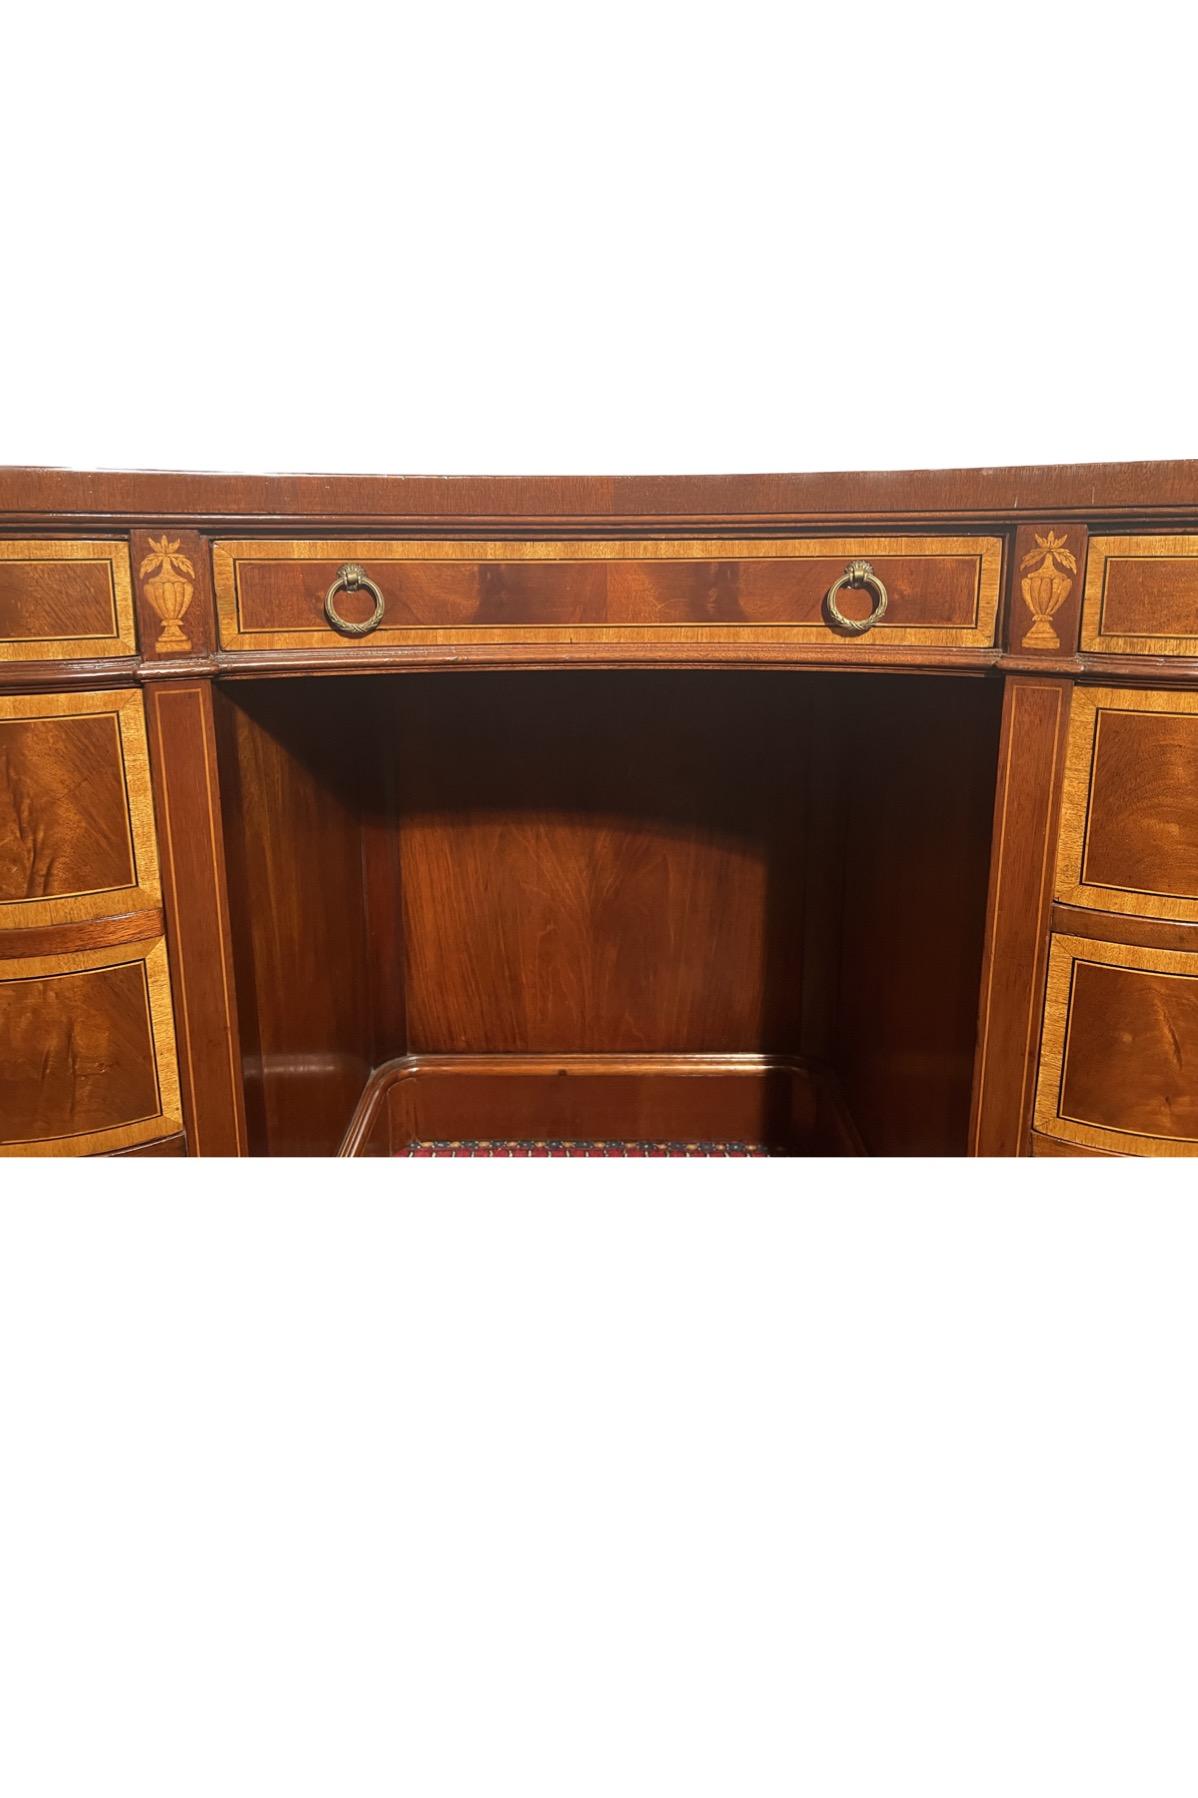 Old English Sheraton Mahogany Kidney Desk In Good Condition For Sale In New Orleans, LA